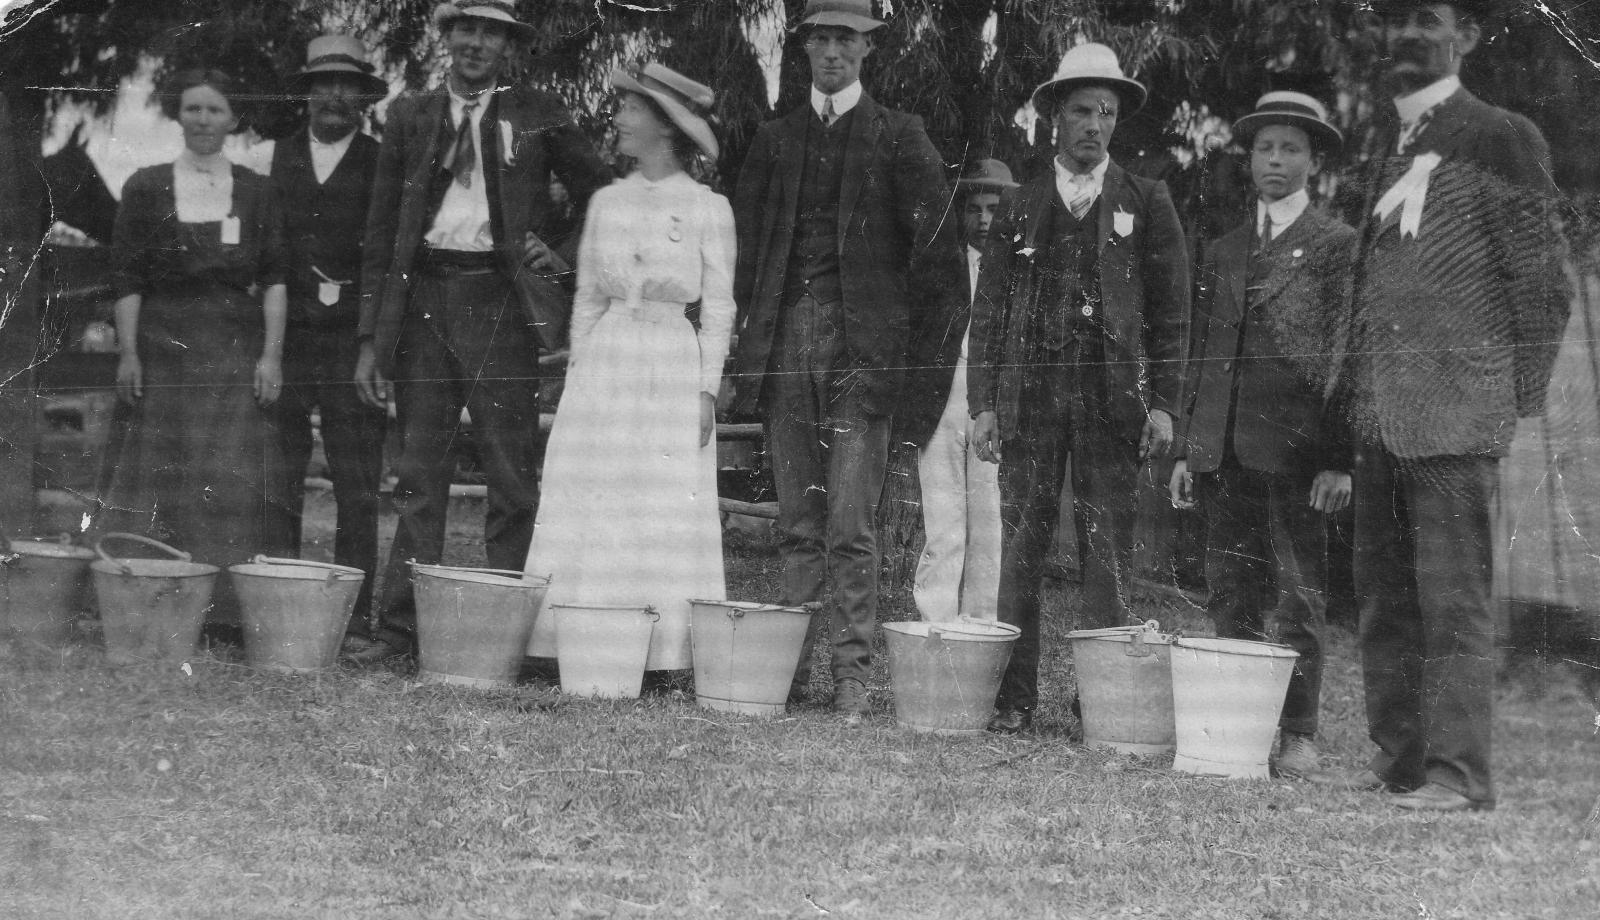 Milk judging at the Busselton Show 1911. Photo 311 BHS Archive